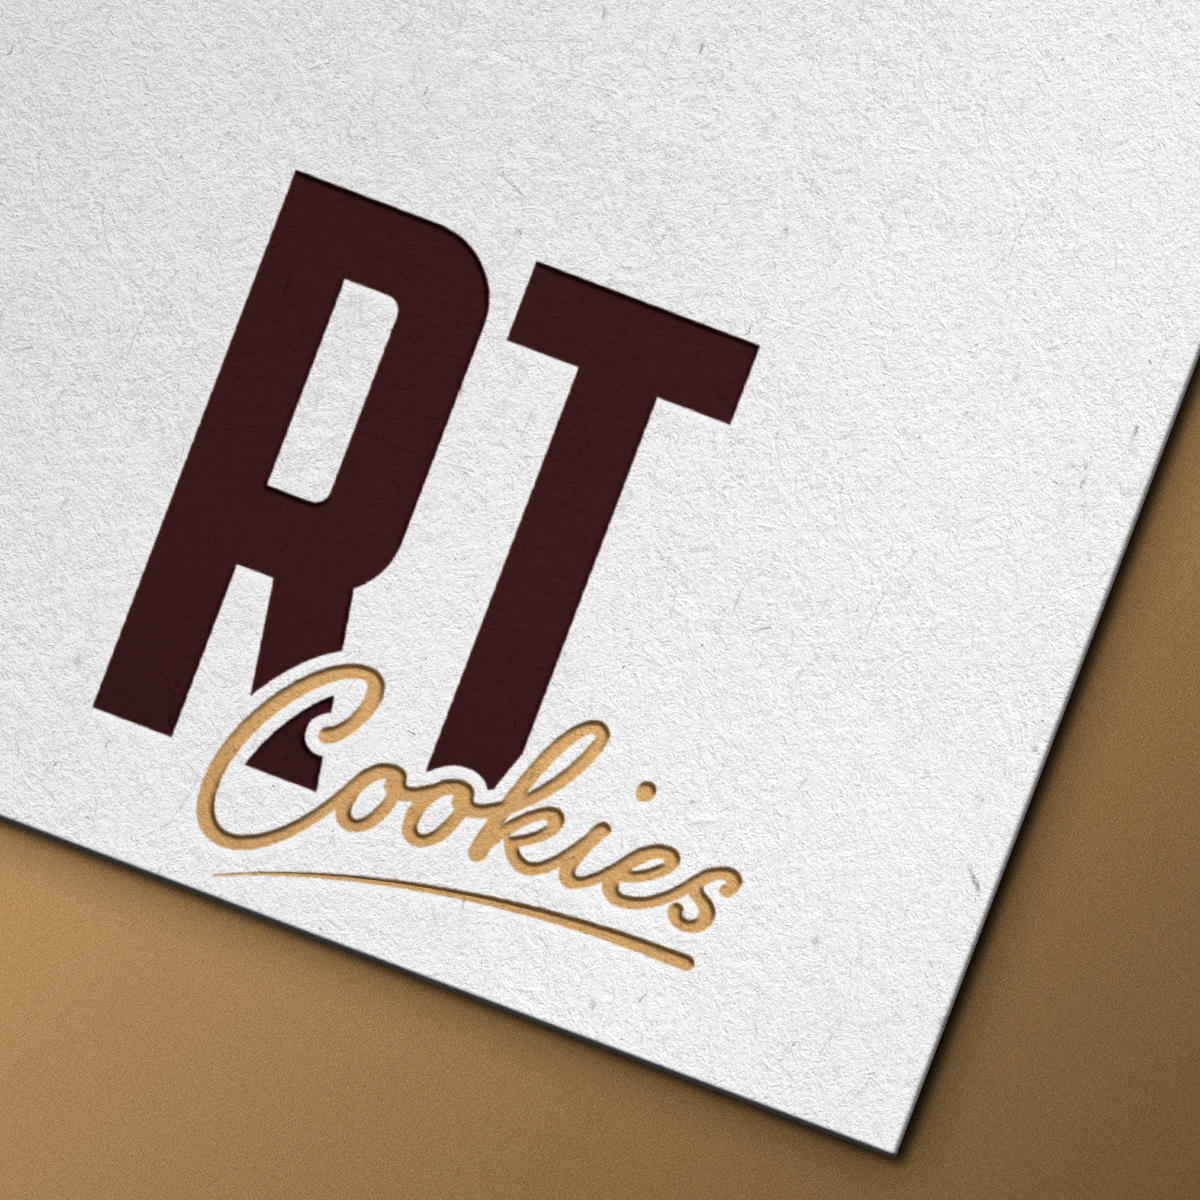 Brand Design for RT Cookies